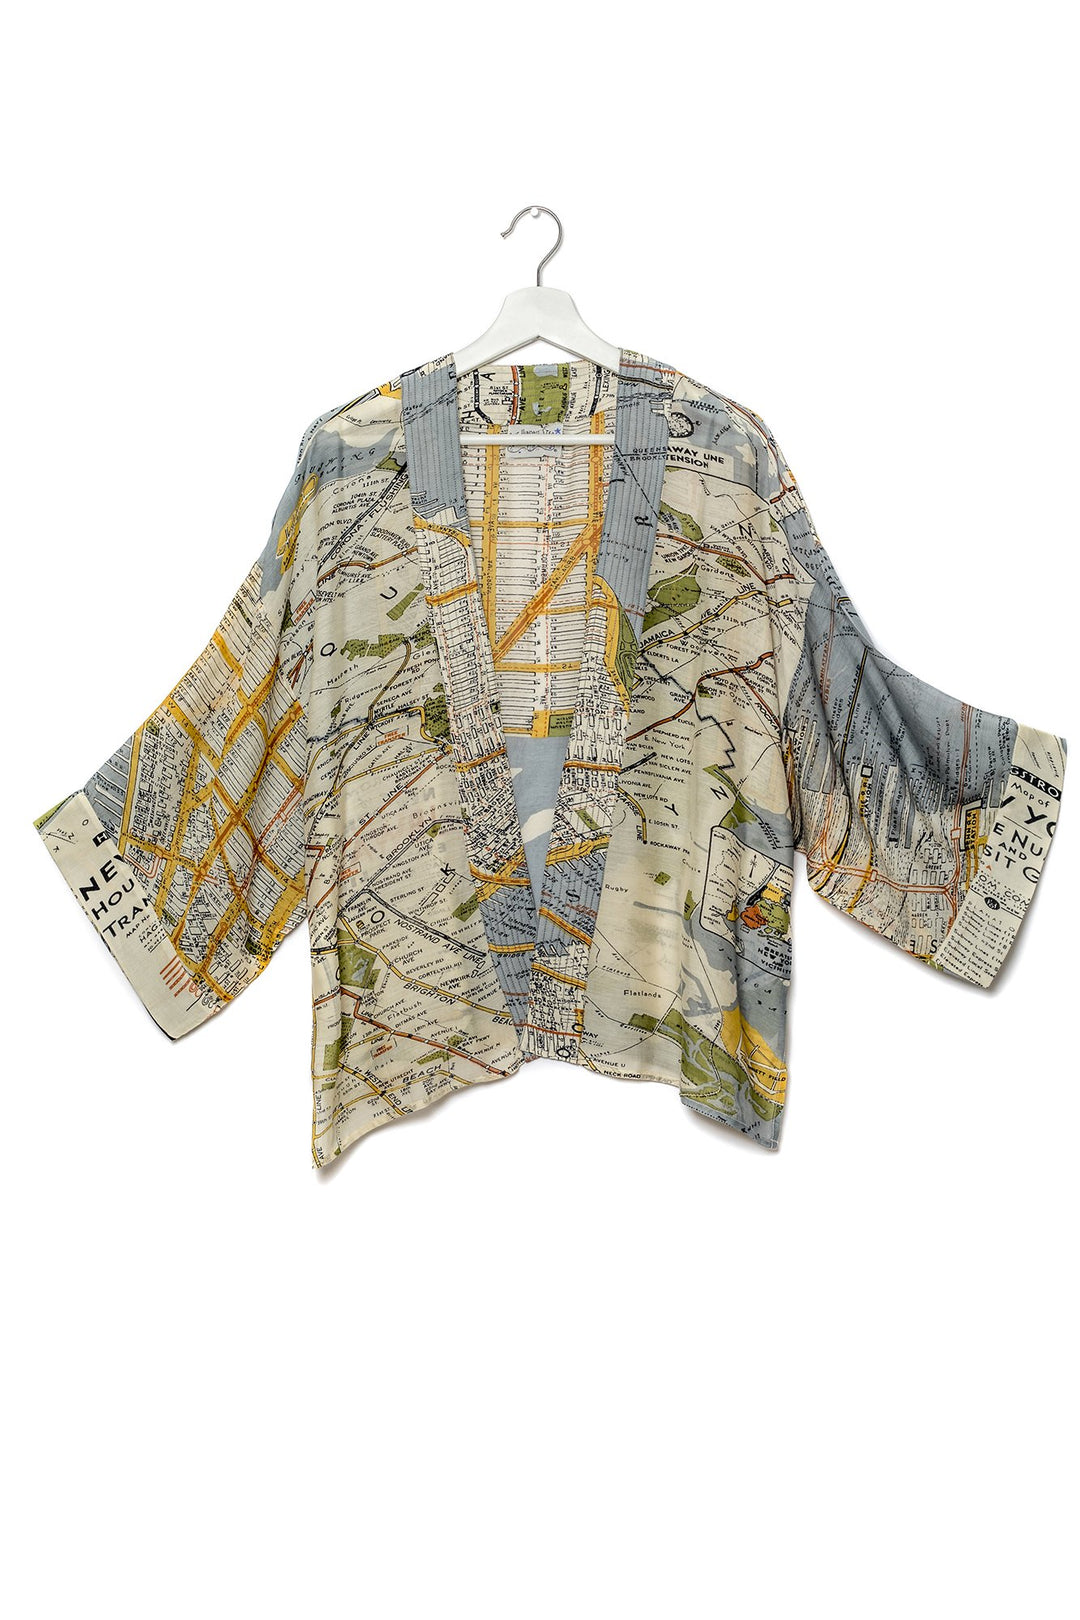 One Hundred Stars New York City Grey Map Kimono- Our bestselling kimono jackets have loose ¾ length sleeves, an open front and a lightly embroidered lapel. Pair with a matching camisole and your favourite jeans in summer or layer over a polo neck during the cooler months.